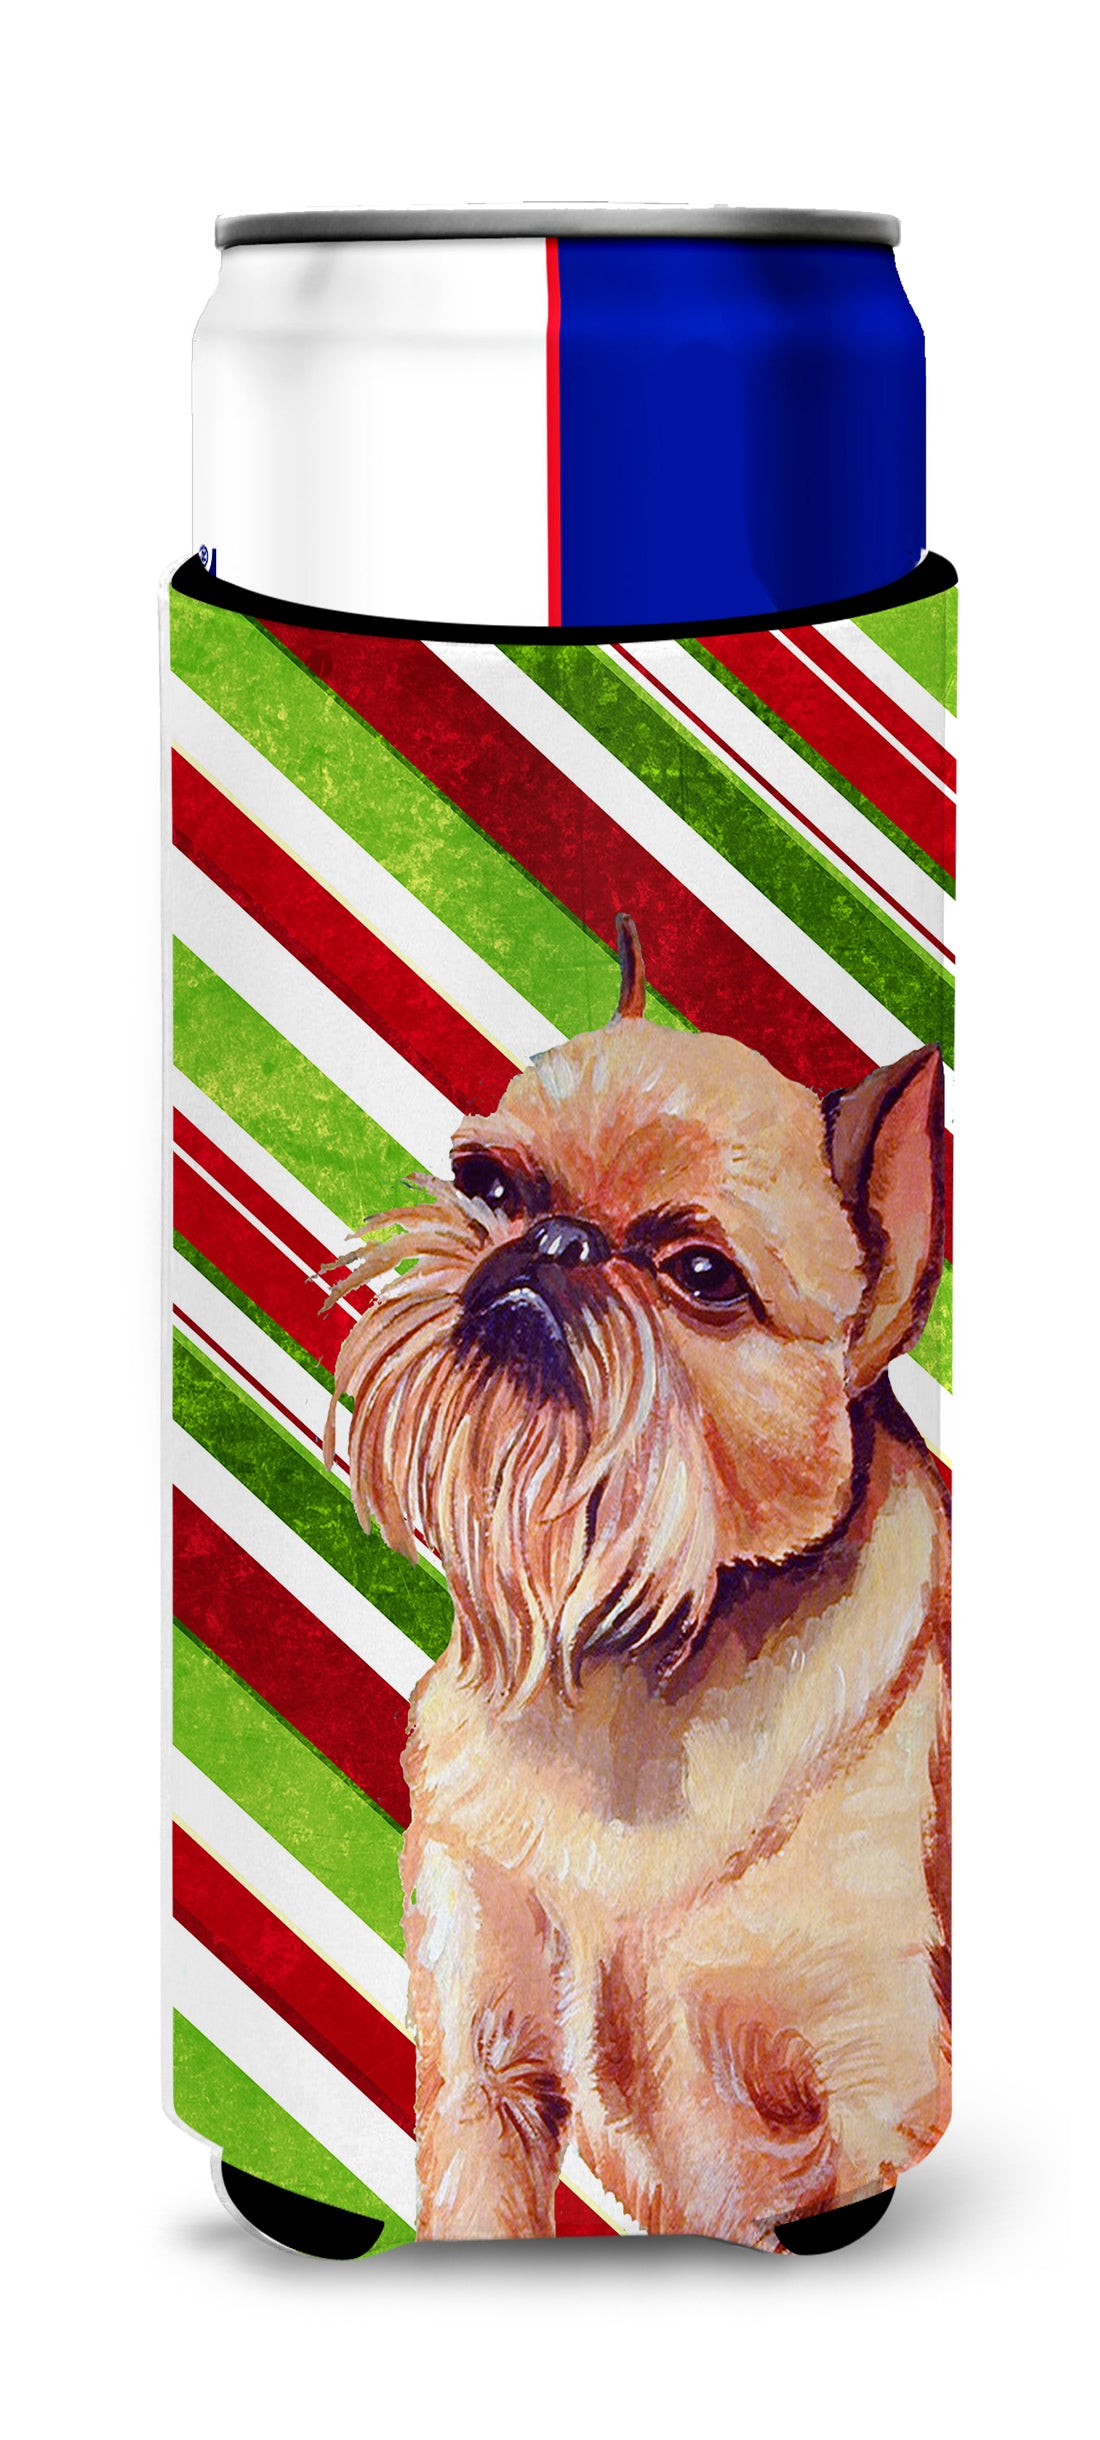 Brussels Griffon Candy Cane Holiday Christmas Ultra Beverage Insulators for slim cans LH9224MUK.